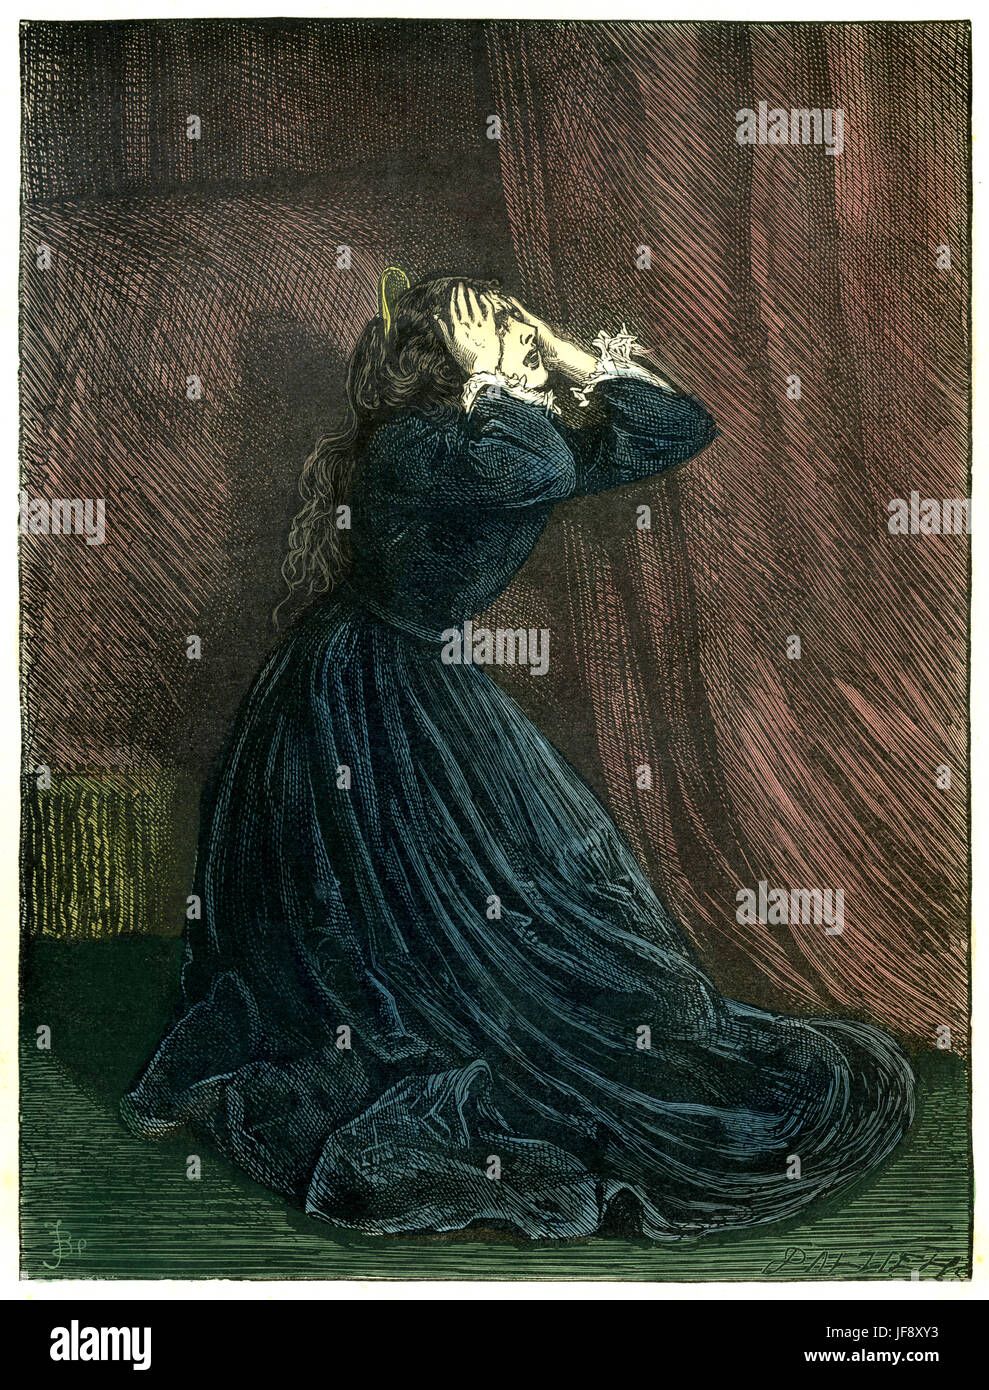 Lady Dedlock in Bleak House, novel by Charles Dickens (7 February 1812 – 9 June 1870), chapter 29 - 'O my child, o my child'. Illustration by Fred Barnard (16 May 1846 – 28 September 1896) Stock Photo